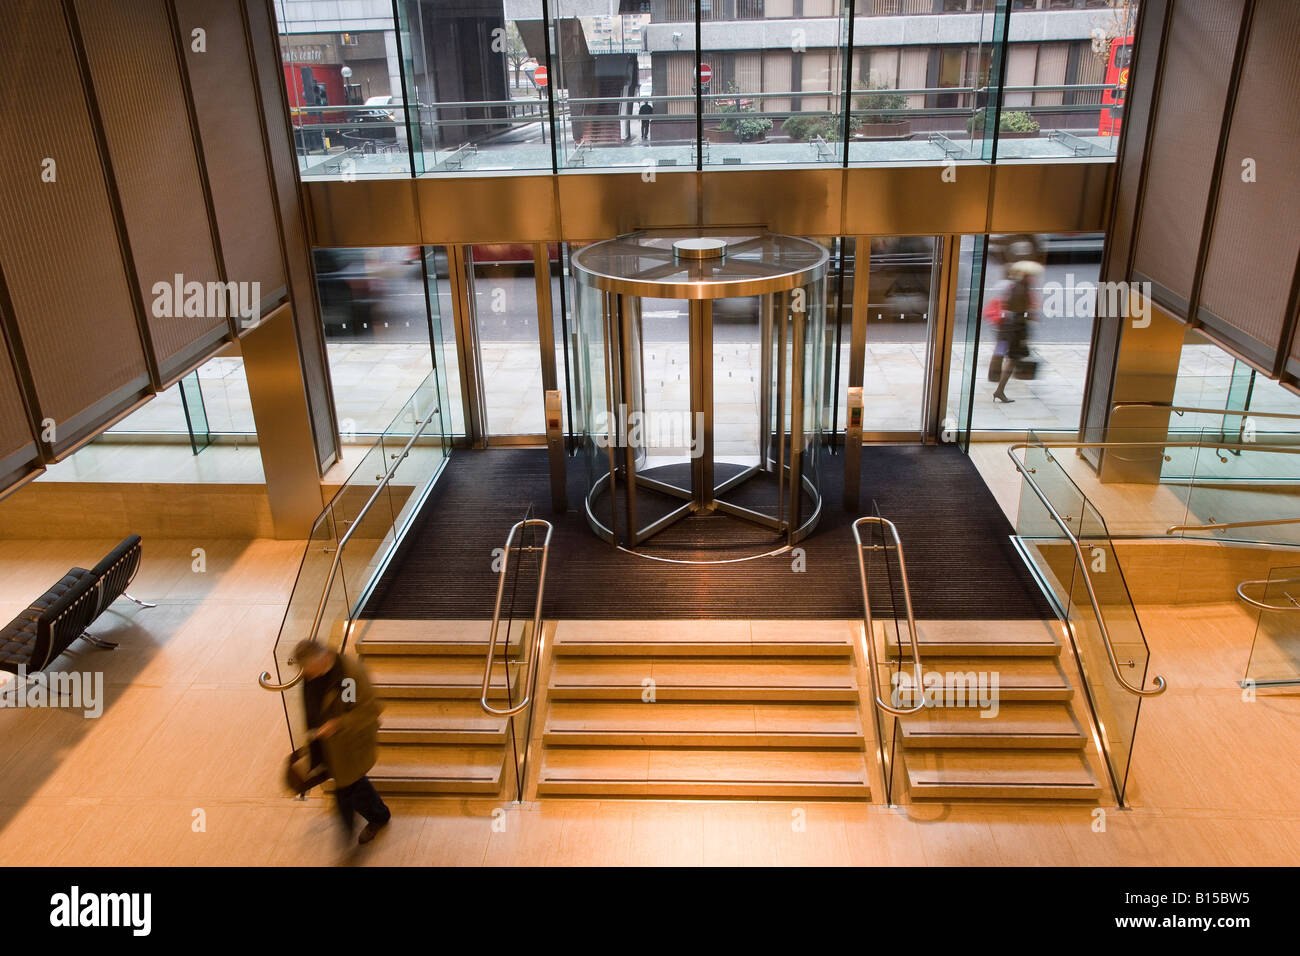 A revolving door stands in the entrance to the lobby of a new office building. Stock Photo